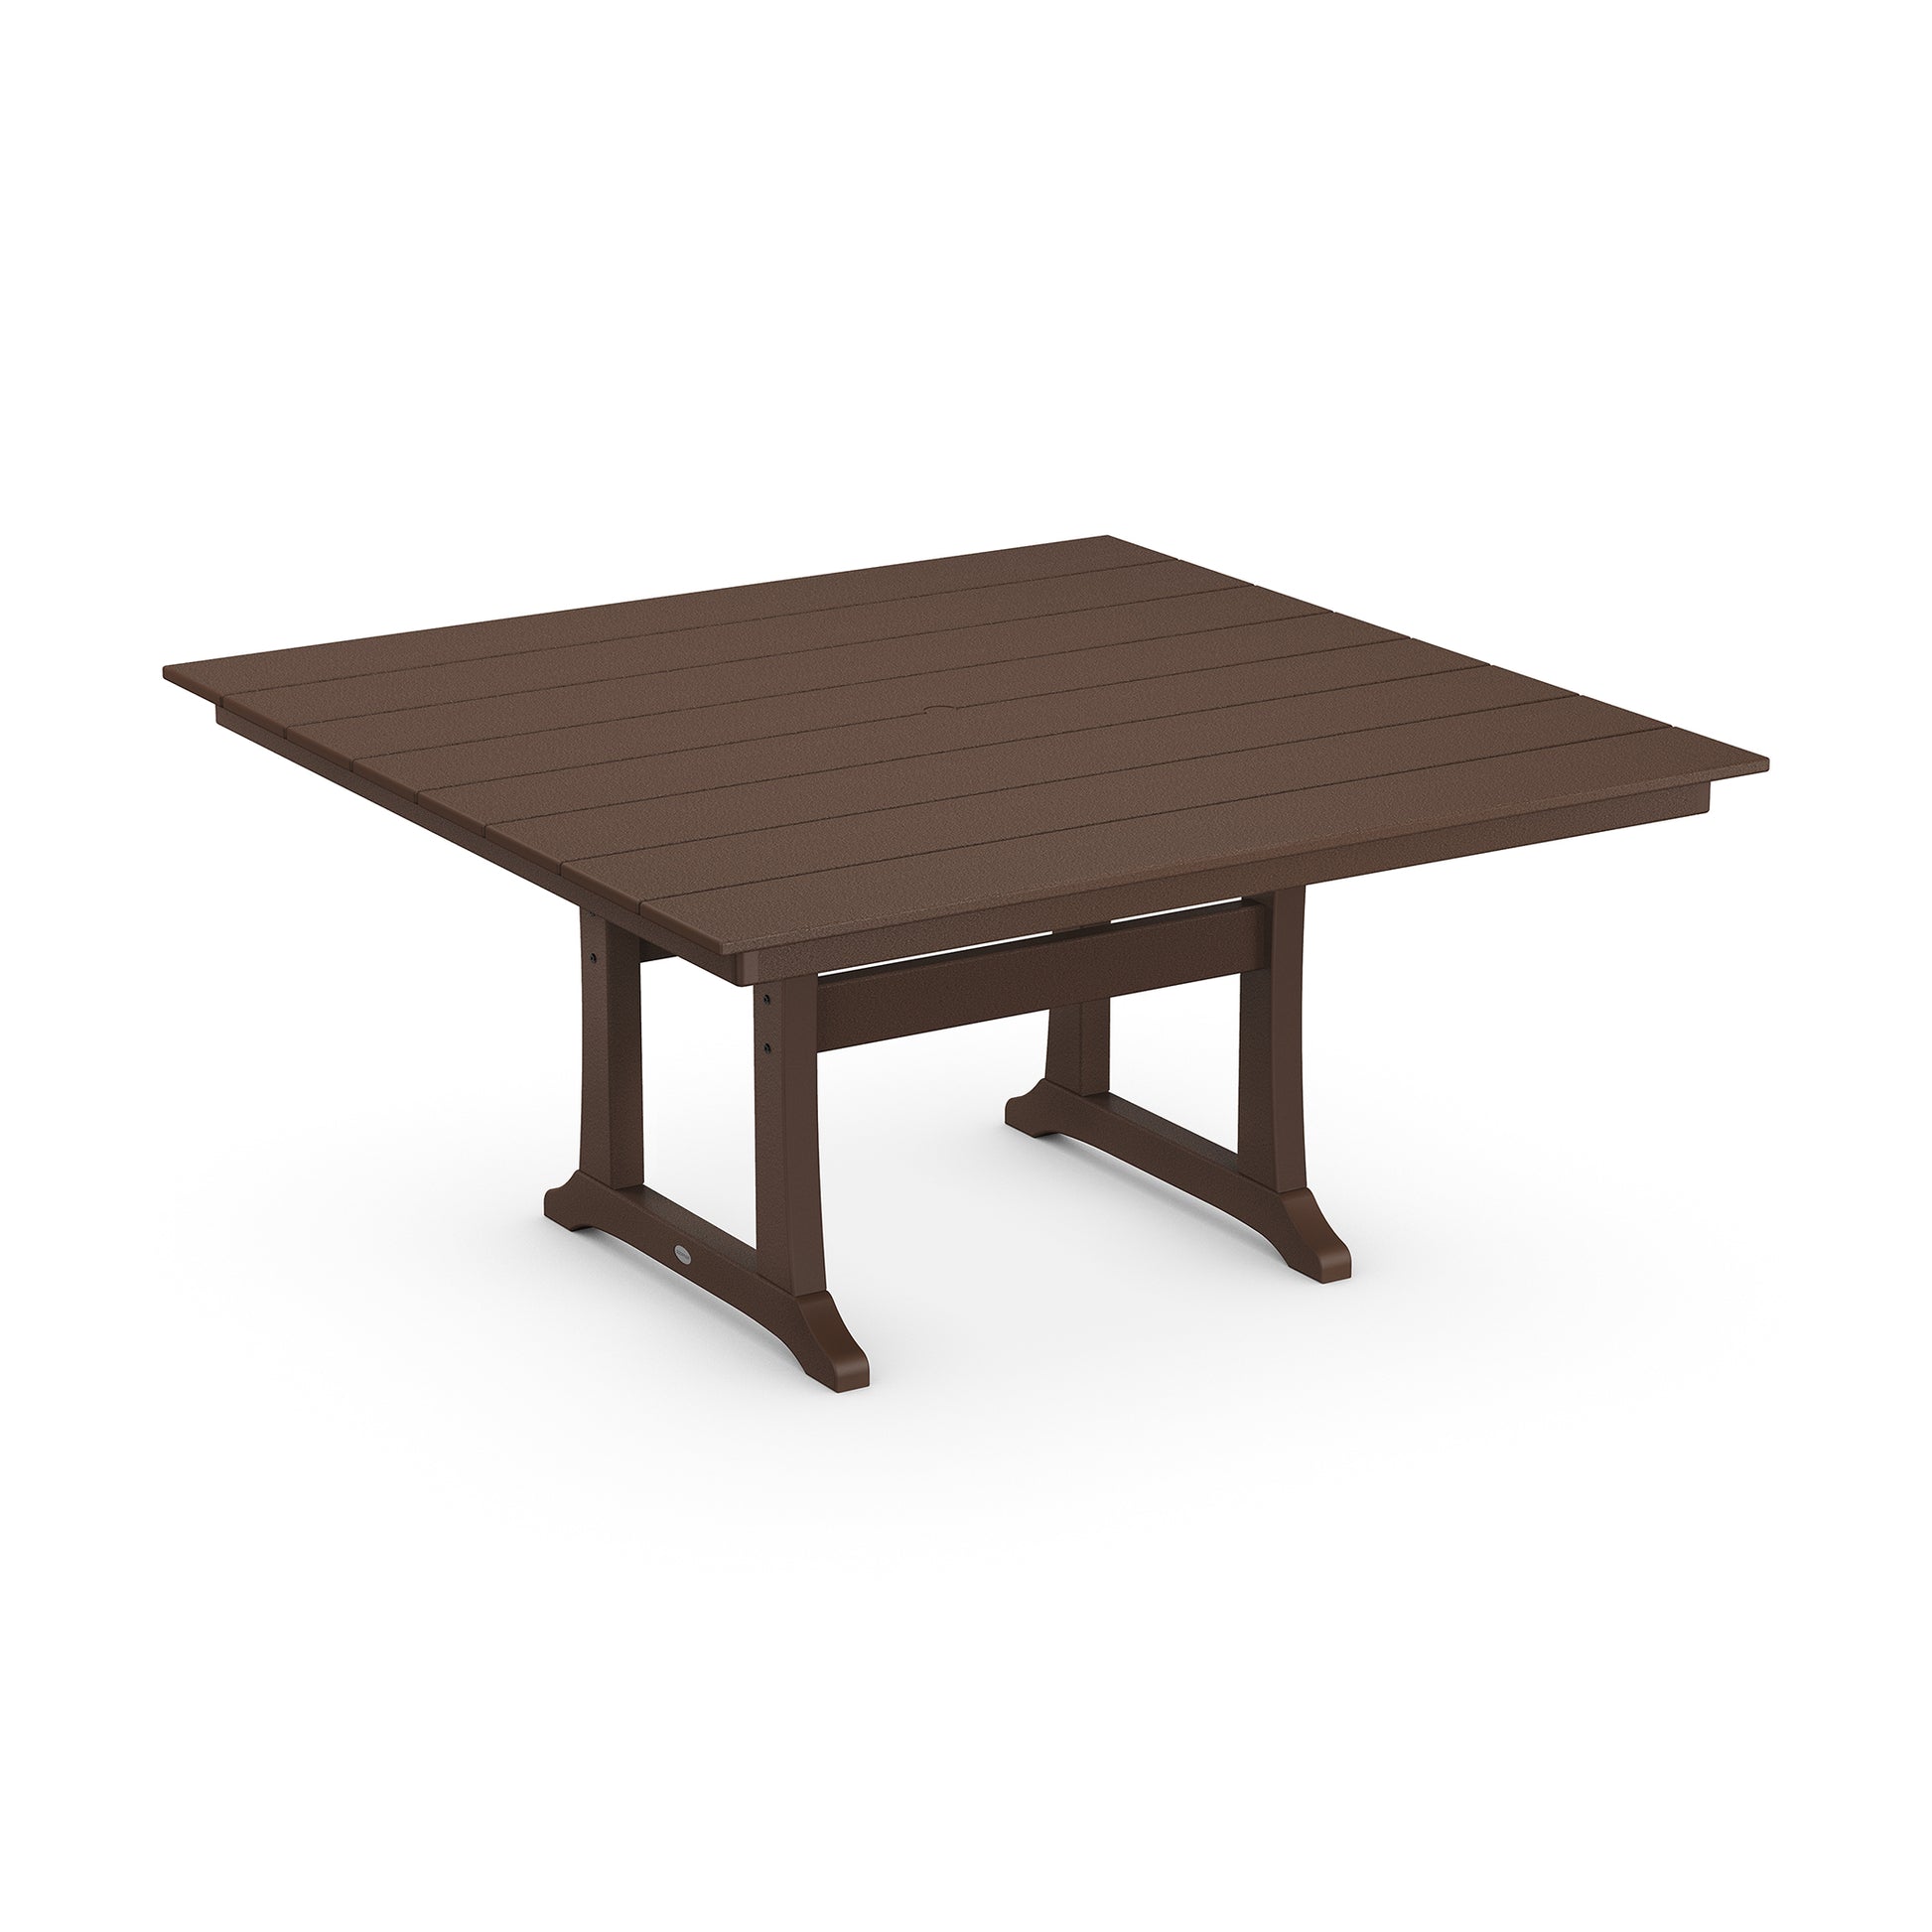 A 3D rendering of a large, square, brown POLYWOOD Farmhouse Trestle 59" Dining Table with sturdy crossed-leg supports and slatted tabletop design, made from POLYWOOD® lumber.